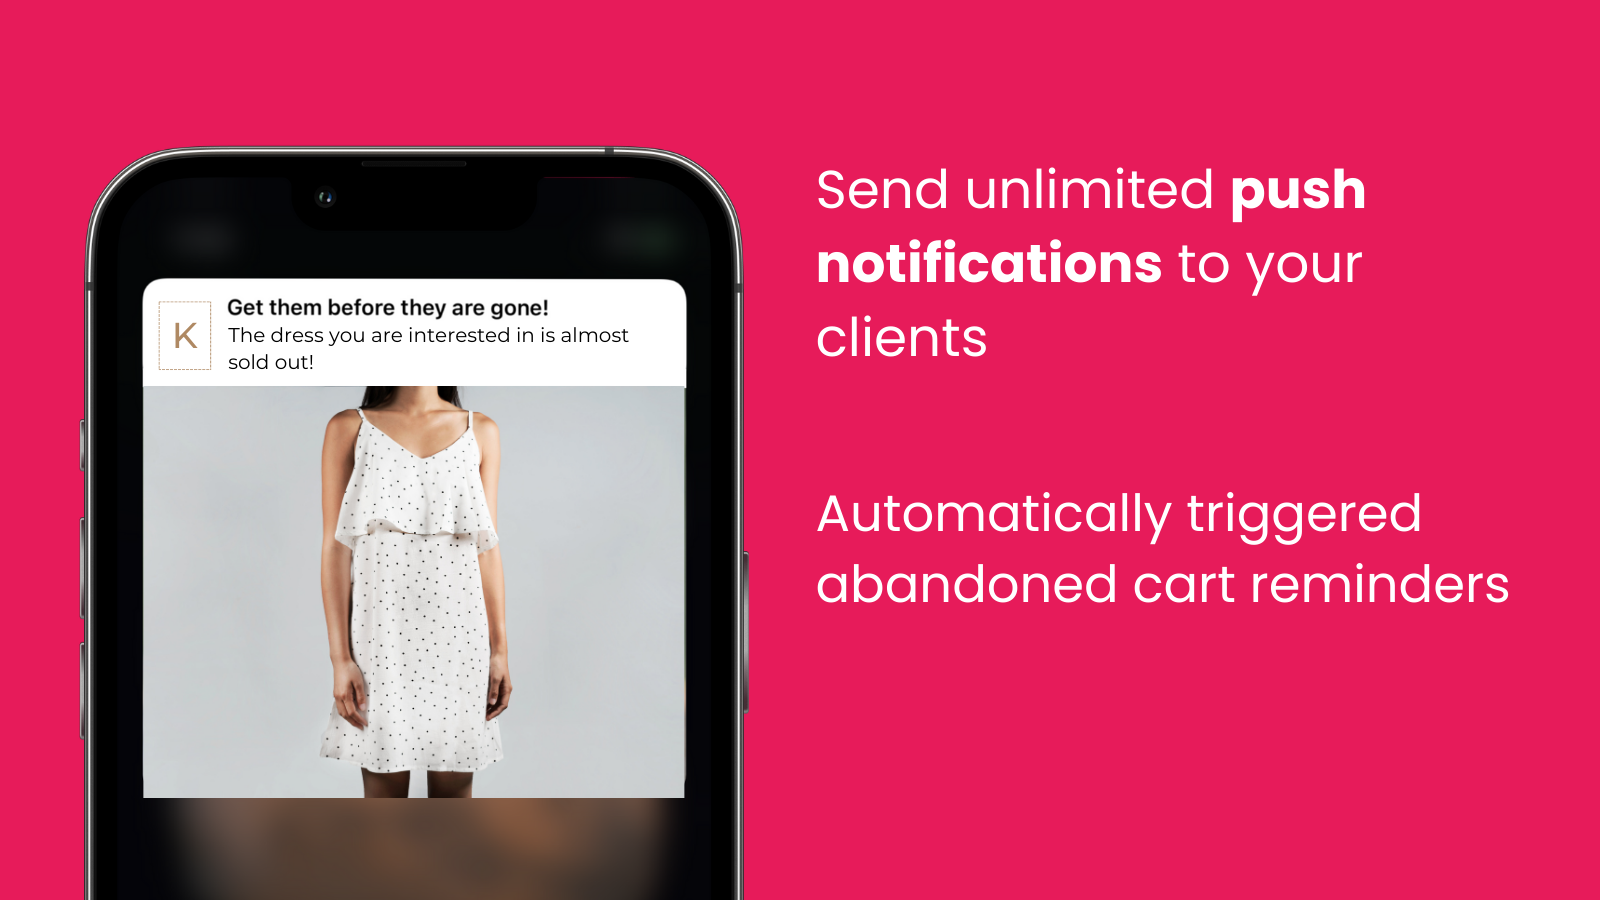 Send unlimited push notifications to your clients